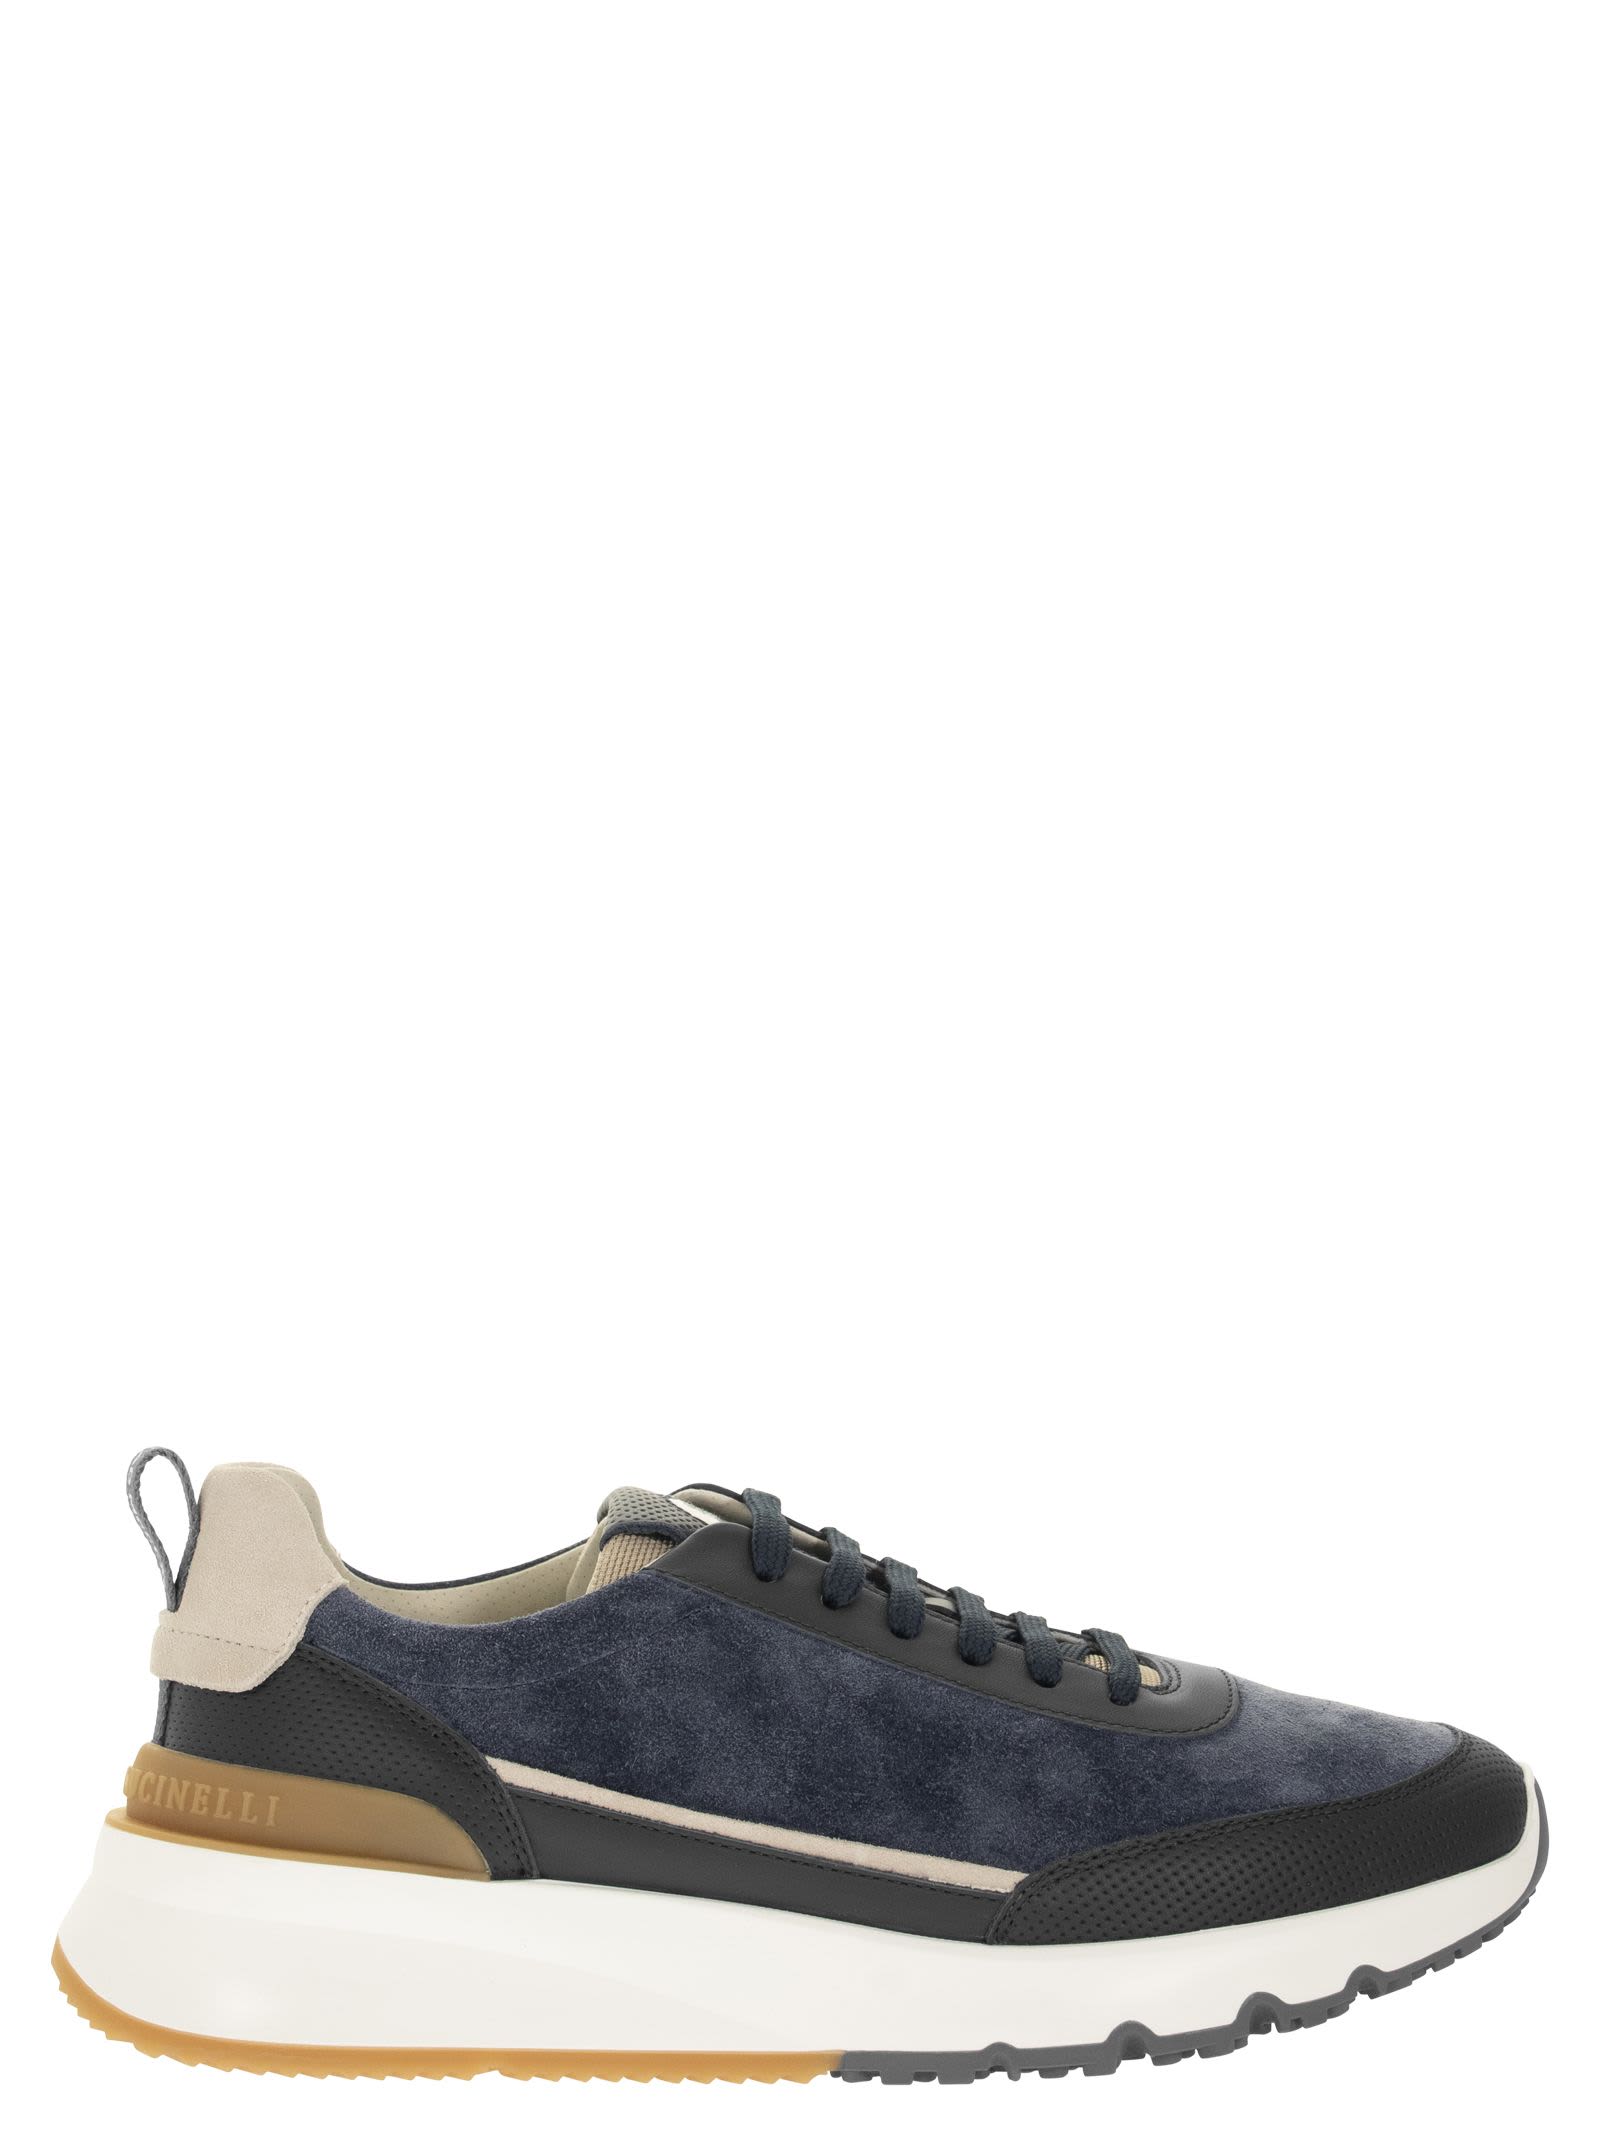 Brunello Cucinelli Runners In Washed Suede And Perforated Calfskin